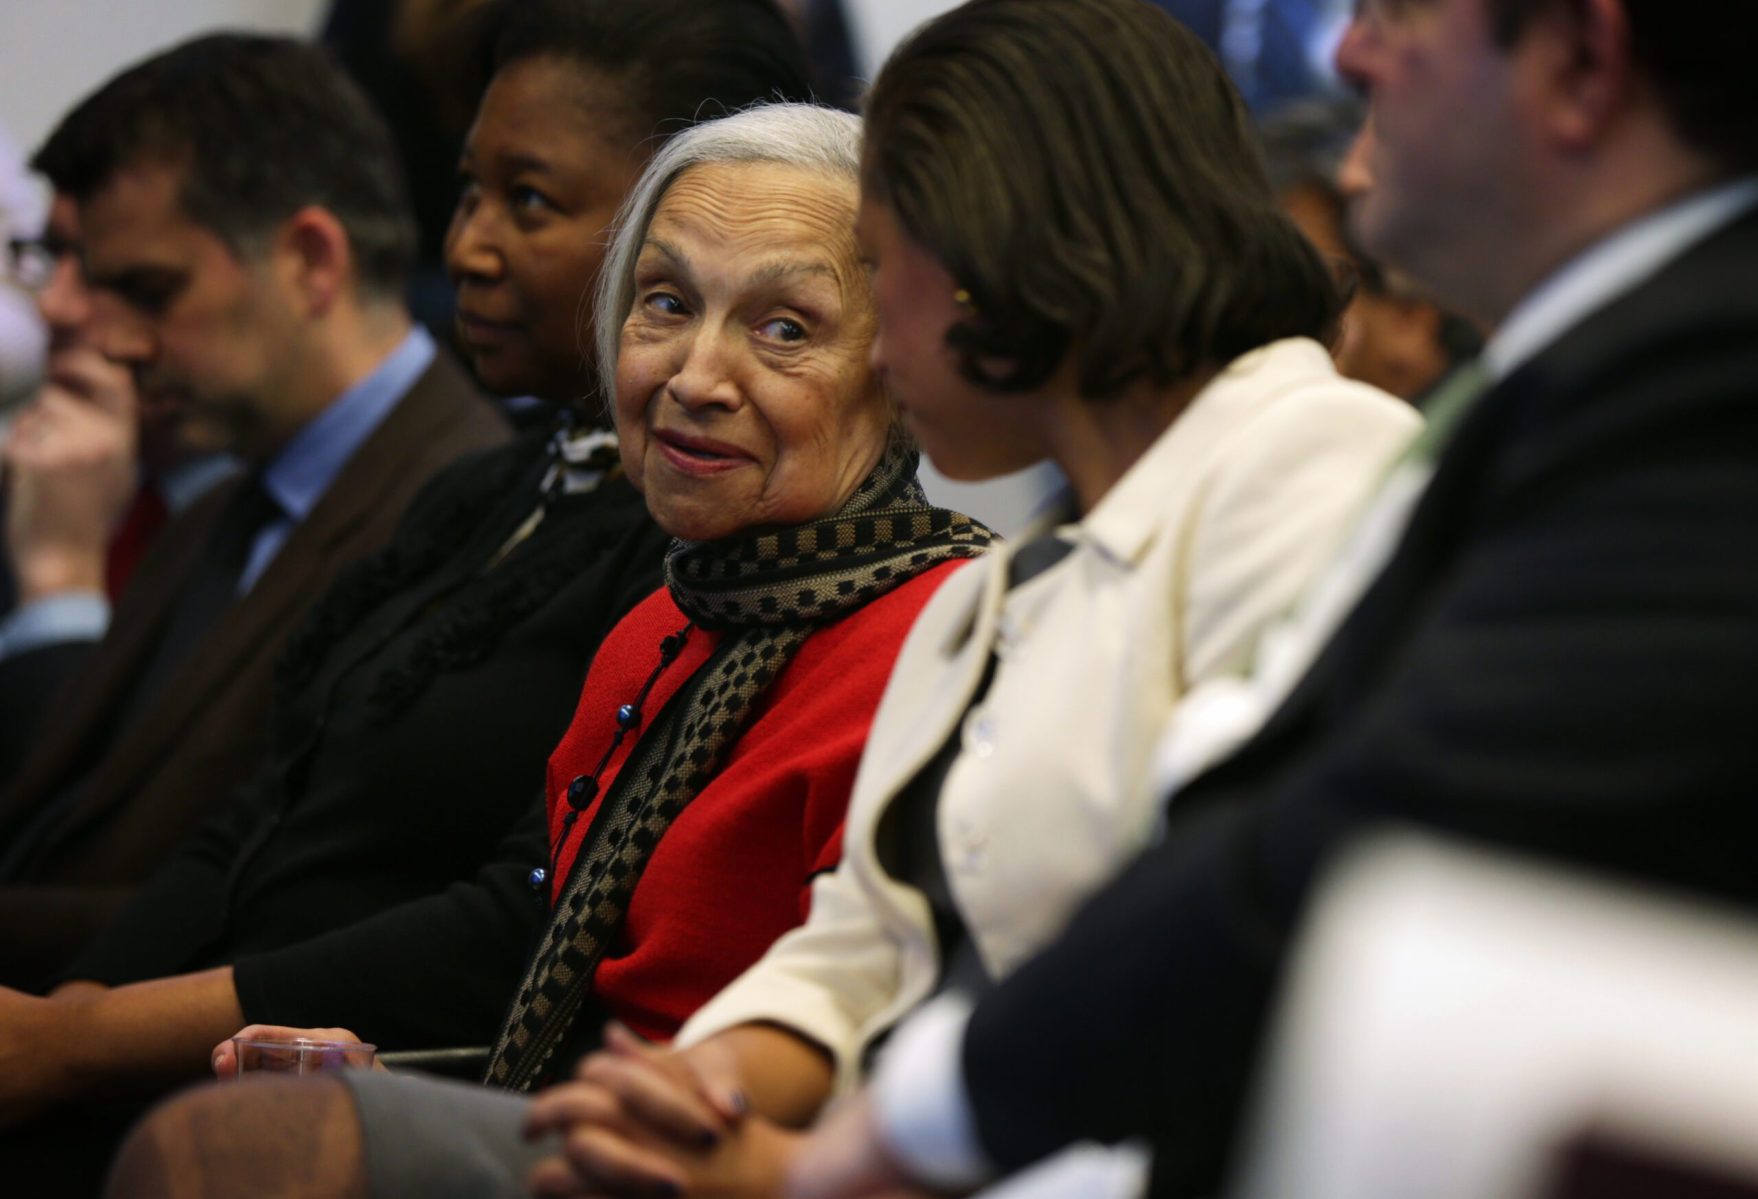 Lois Dickson Rice, center, in red, with her daughter, National Security Adviser Susan Rice